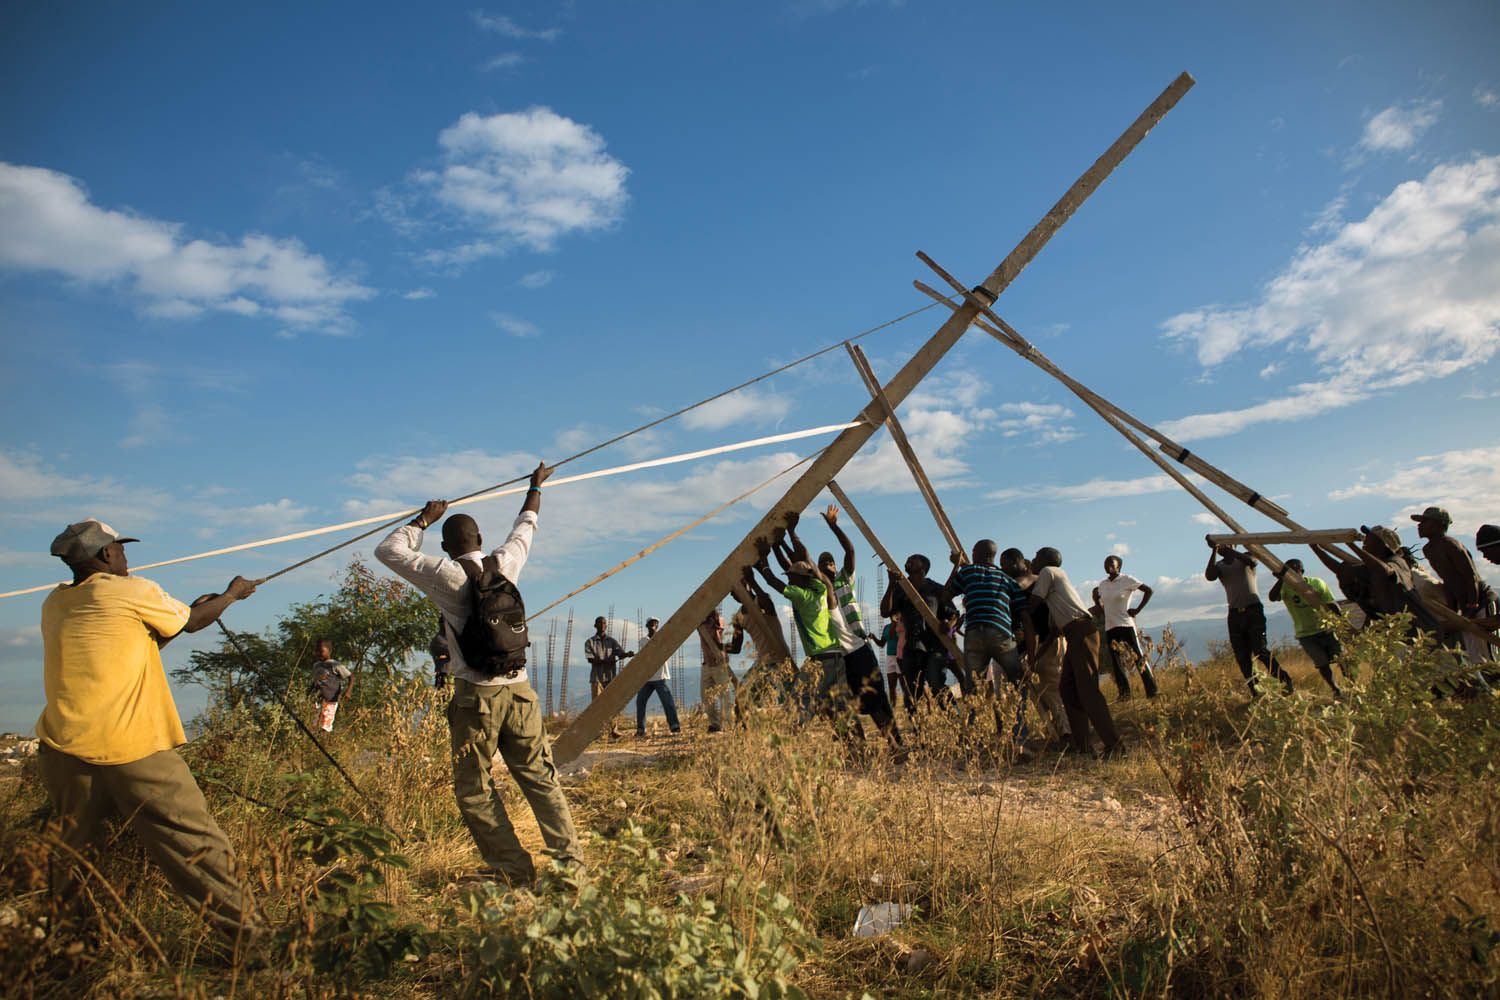 Residents of Canaan raise the first of three handmade utility poles, part of an improvised effort to receive electricity from the state power grid. Image by Allison Shelley. Haiti, 2017.
